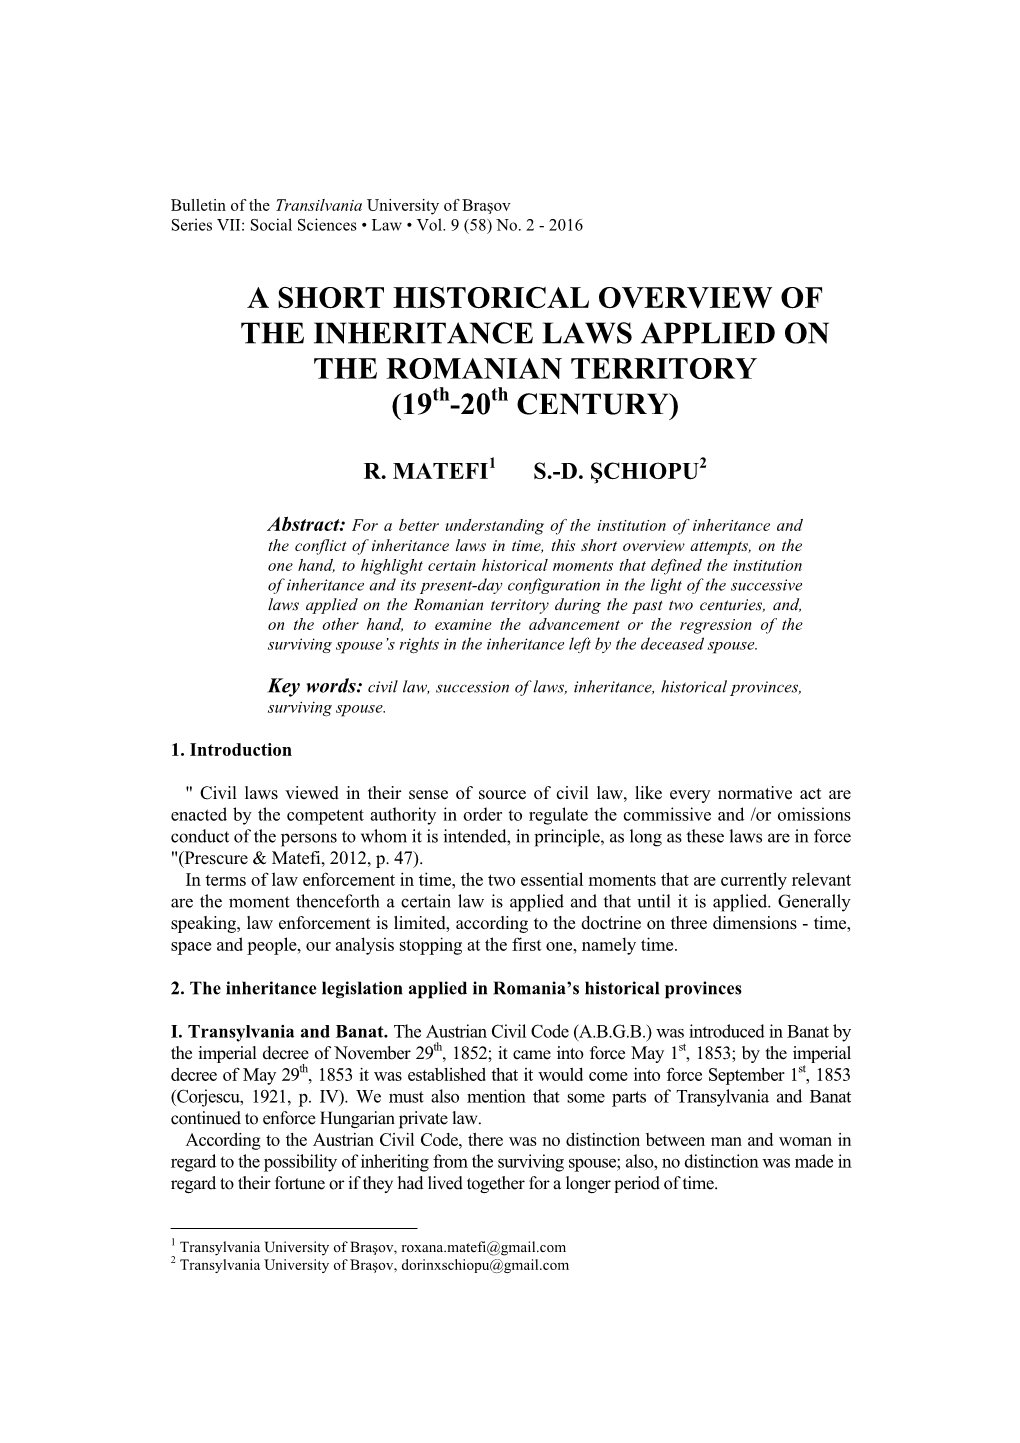 A SHORT HISTORICAL OVERVIEW of the INHERITANCE LAWS APPLIED on the ROMANIAN TERRITORY (19Th-20Th CENTURY)